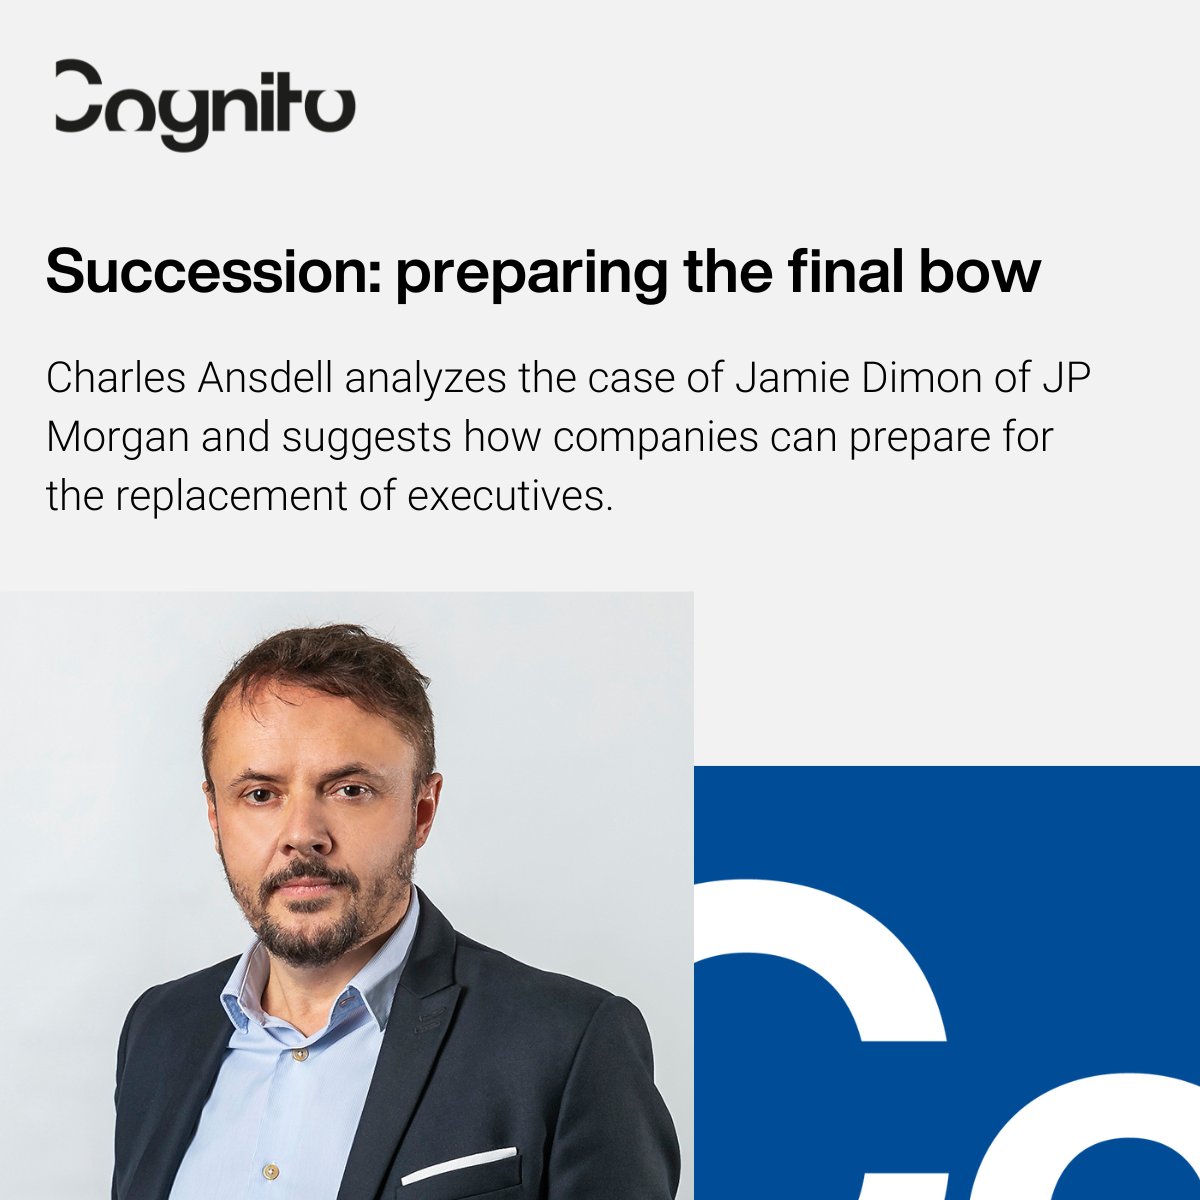 Jamie Dimon’s succession as JP Morgan’s leader is moving up the agenda. Despite the #risks and #challenges, @charlieansdell says succession provides opportunities to reset the narrative. Read his analysis: bit.ly/3UCFoR4